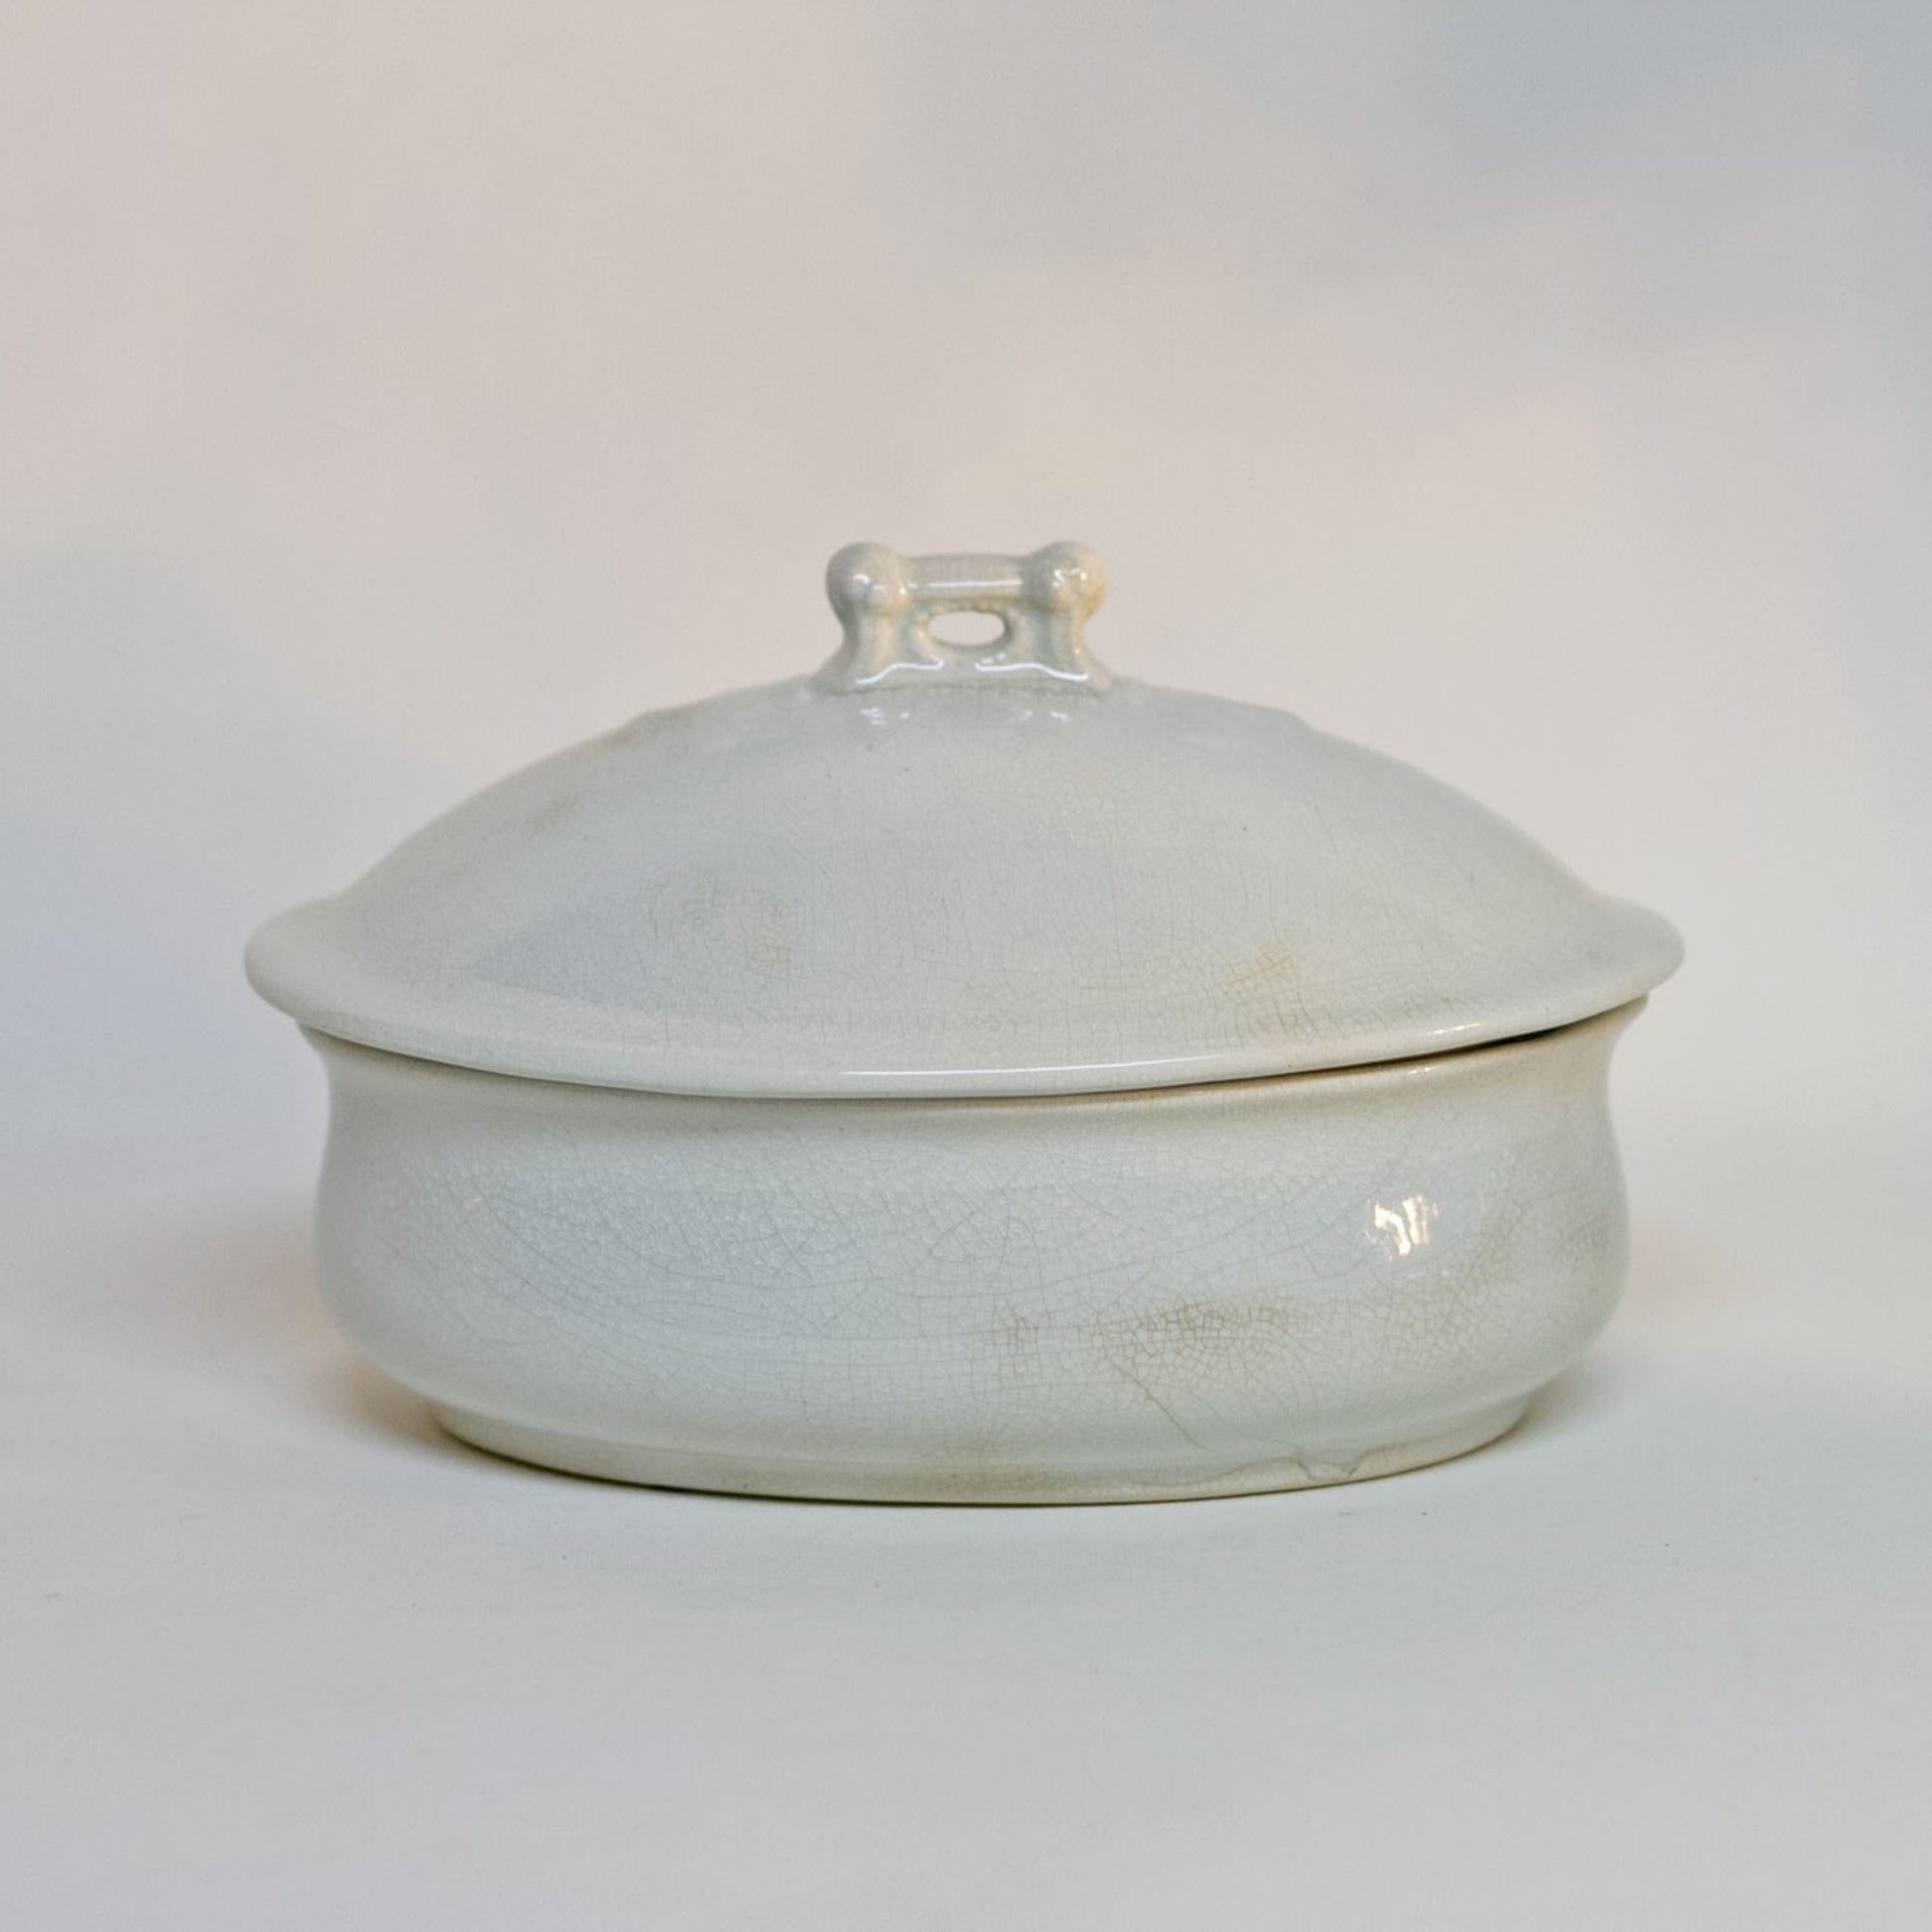 Gorgeous white antique IRONSTONE THREE-PIECE SOAP DISH made by MELLOR, TAYLOR AND COMPANY of Burslem Stoke-on-Tent in England. Set is in the shape of a small oval tureen and complete, including the drain and lid. Stamped dating the piece to between 1880-1904. Some staining, no chips.